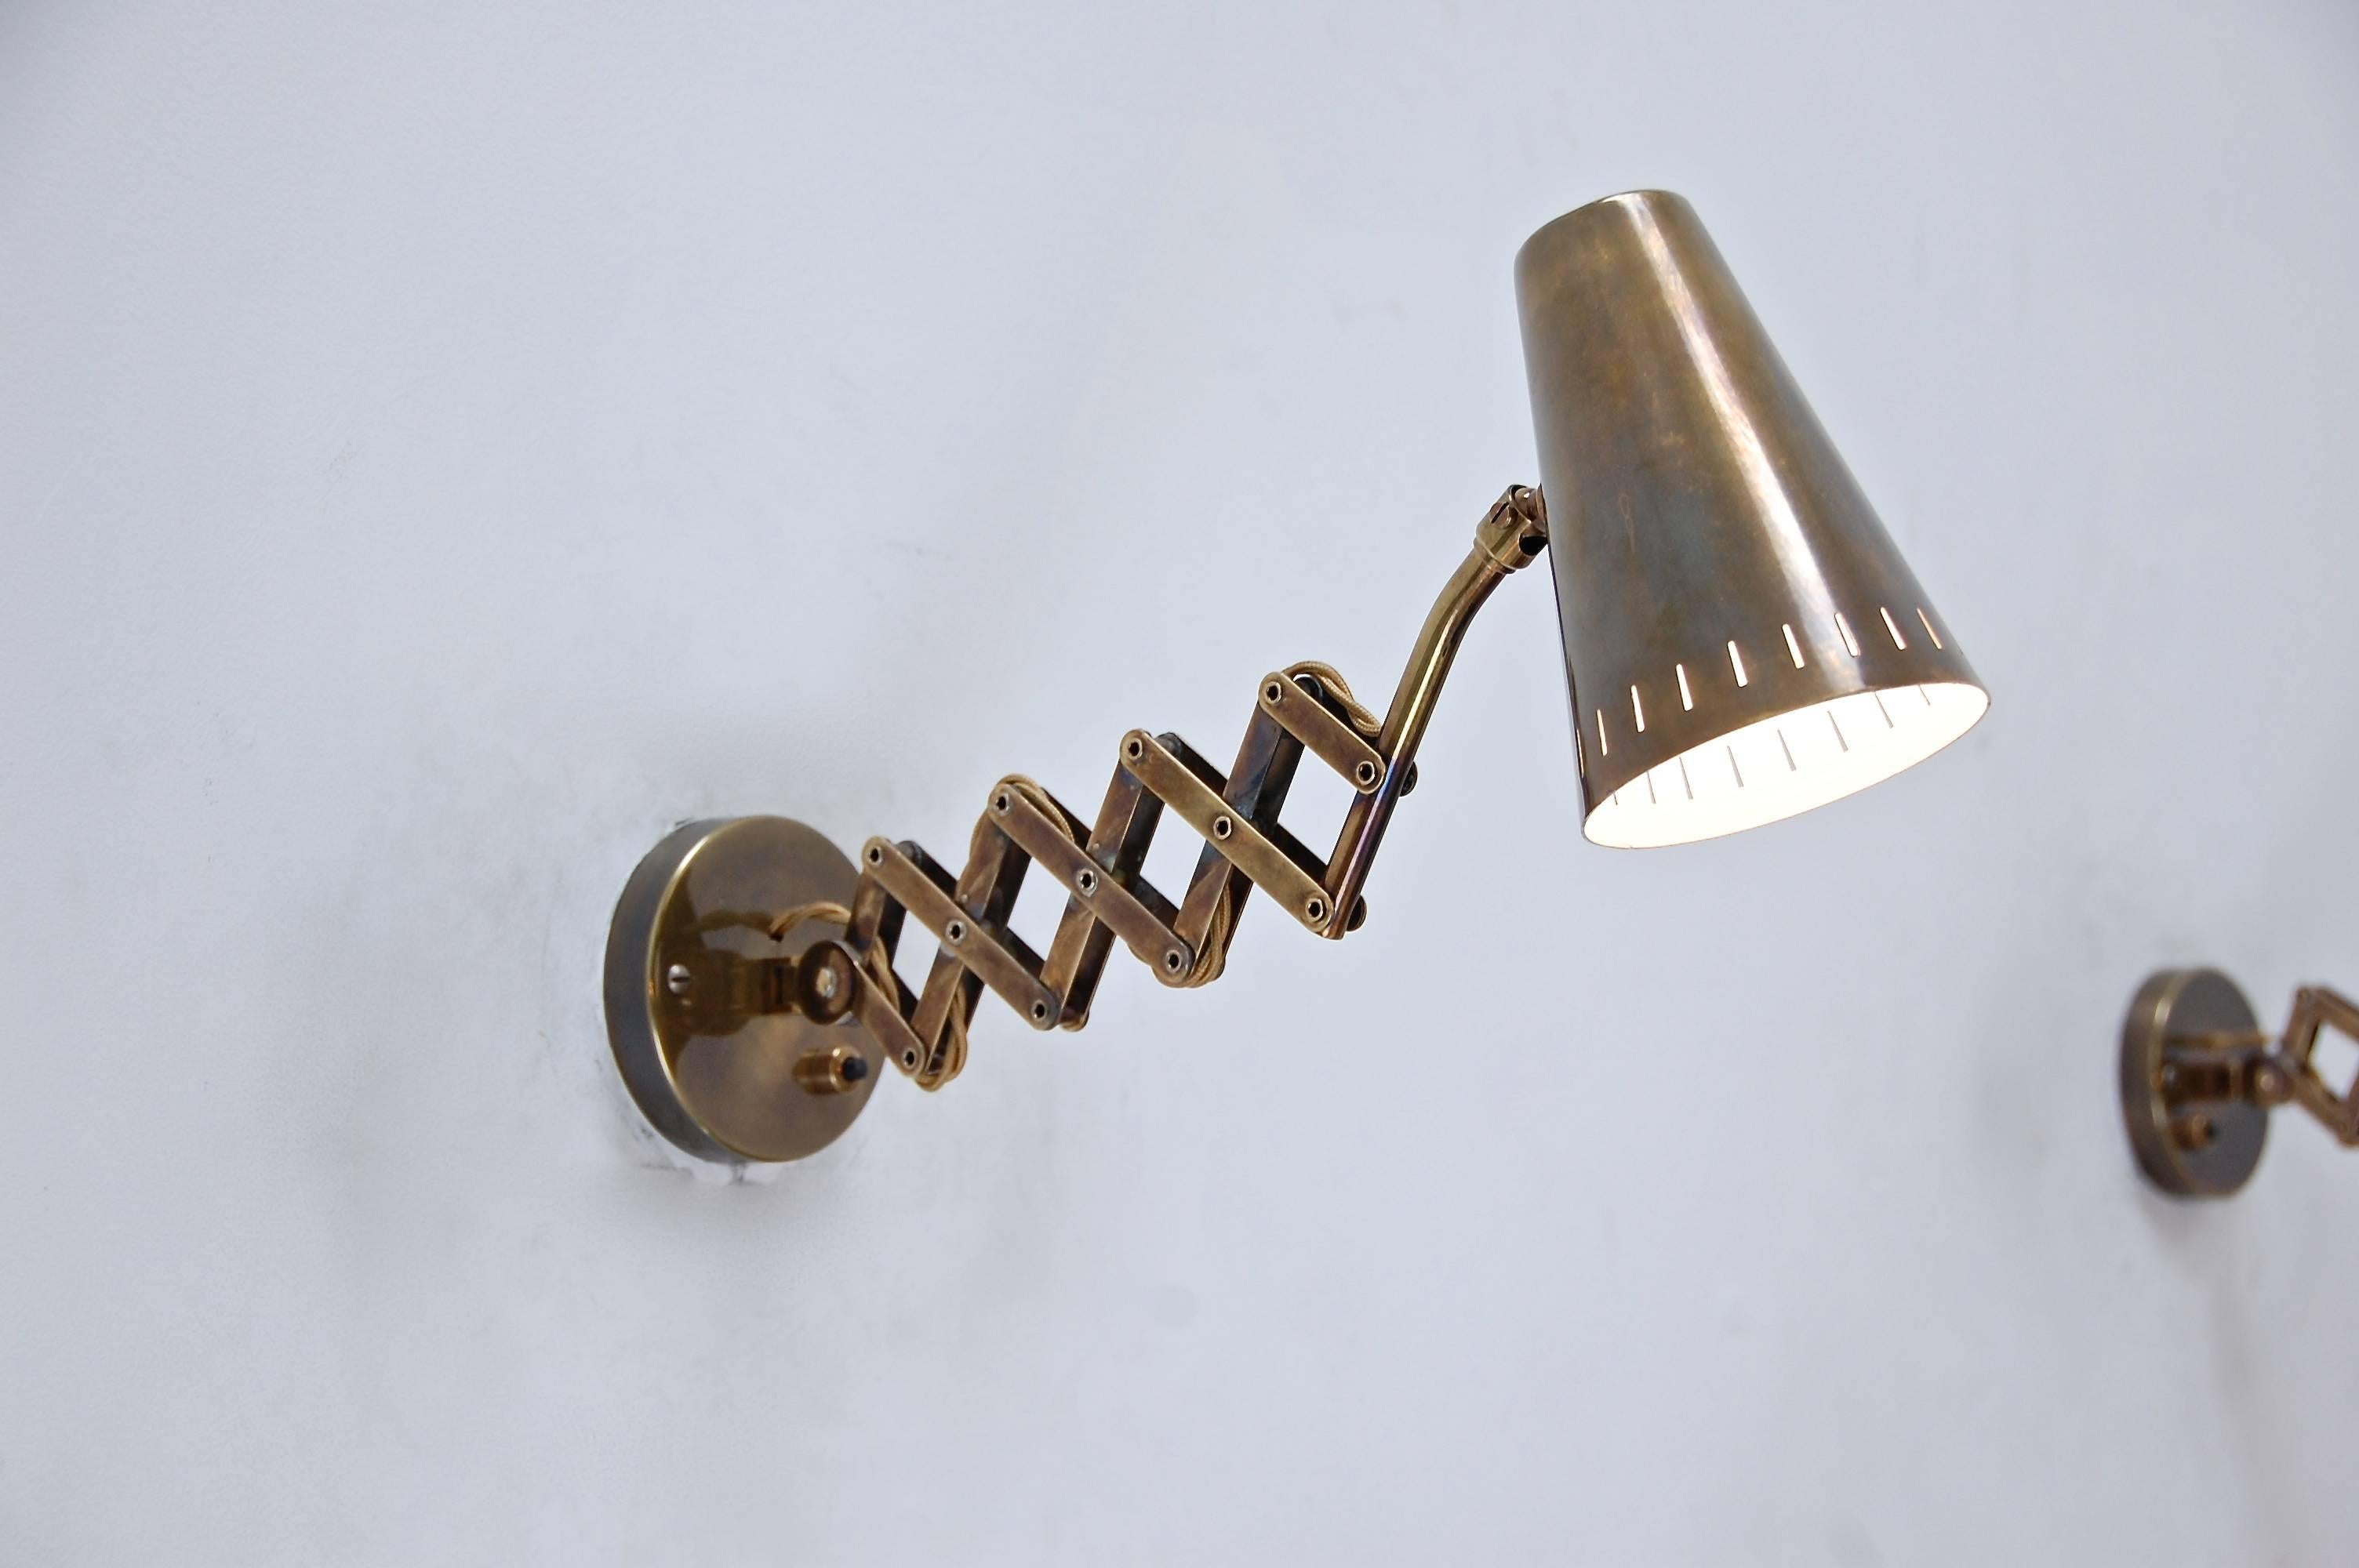 2 wonderful brass scissor sconces from Germany with back plates with a push switch. They articulated in all directions. Patinated brass.
Height: 7”.
Max depth: 19”.
Min depth: 9.5”. 
Width: 4”.
Shade: 4 x 5.5”.
 